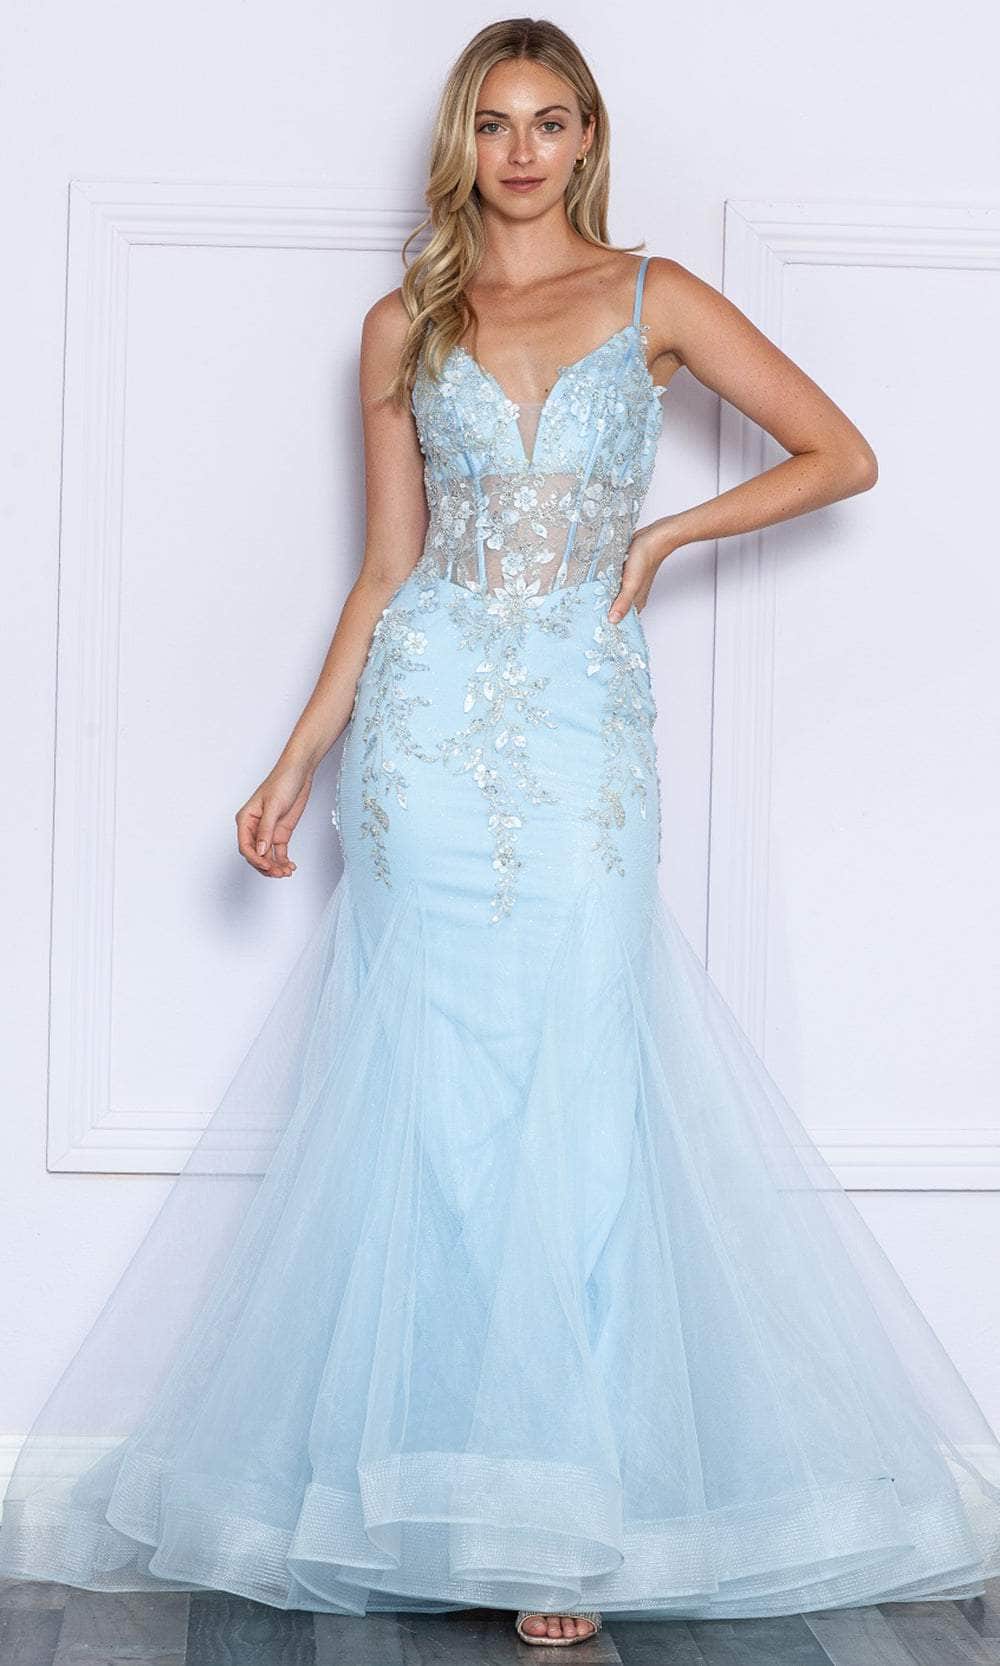 Image of Poly USA 9374 - Appliqued See-through Corset Prom Dress